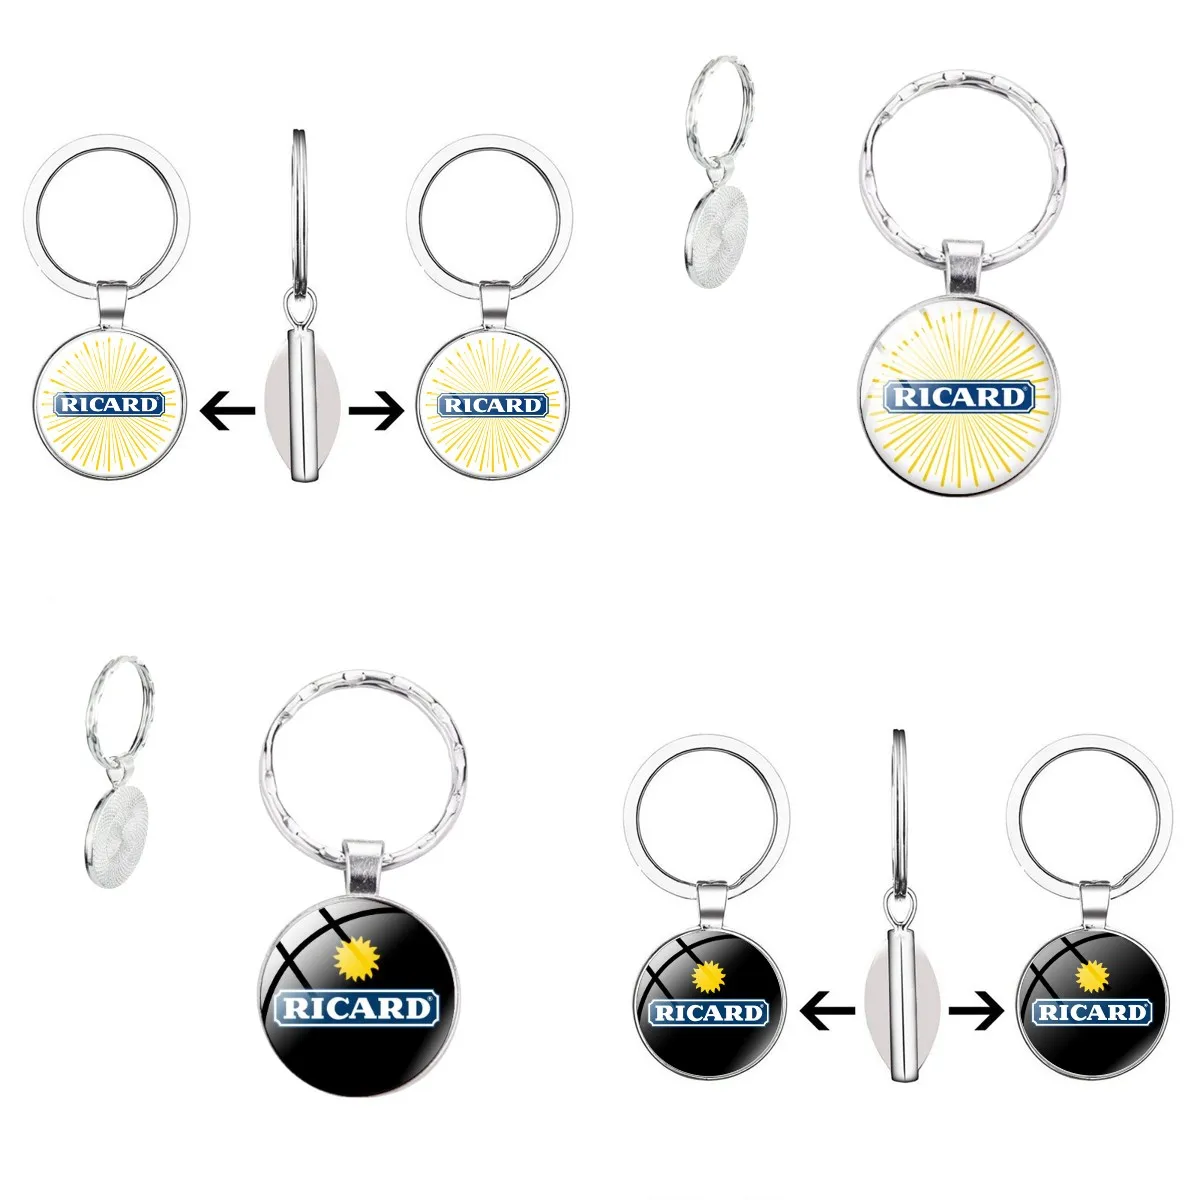 

RICARD Keychain Classic Double Sided Keychain Wine Beer Glass Keychain Fans Customized Souvenir Gift